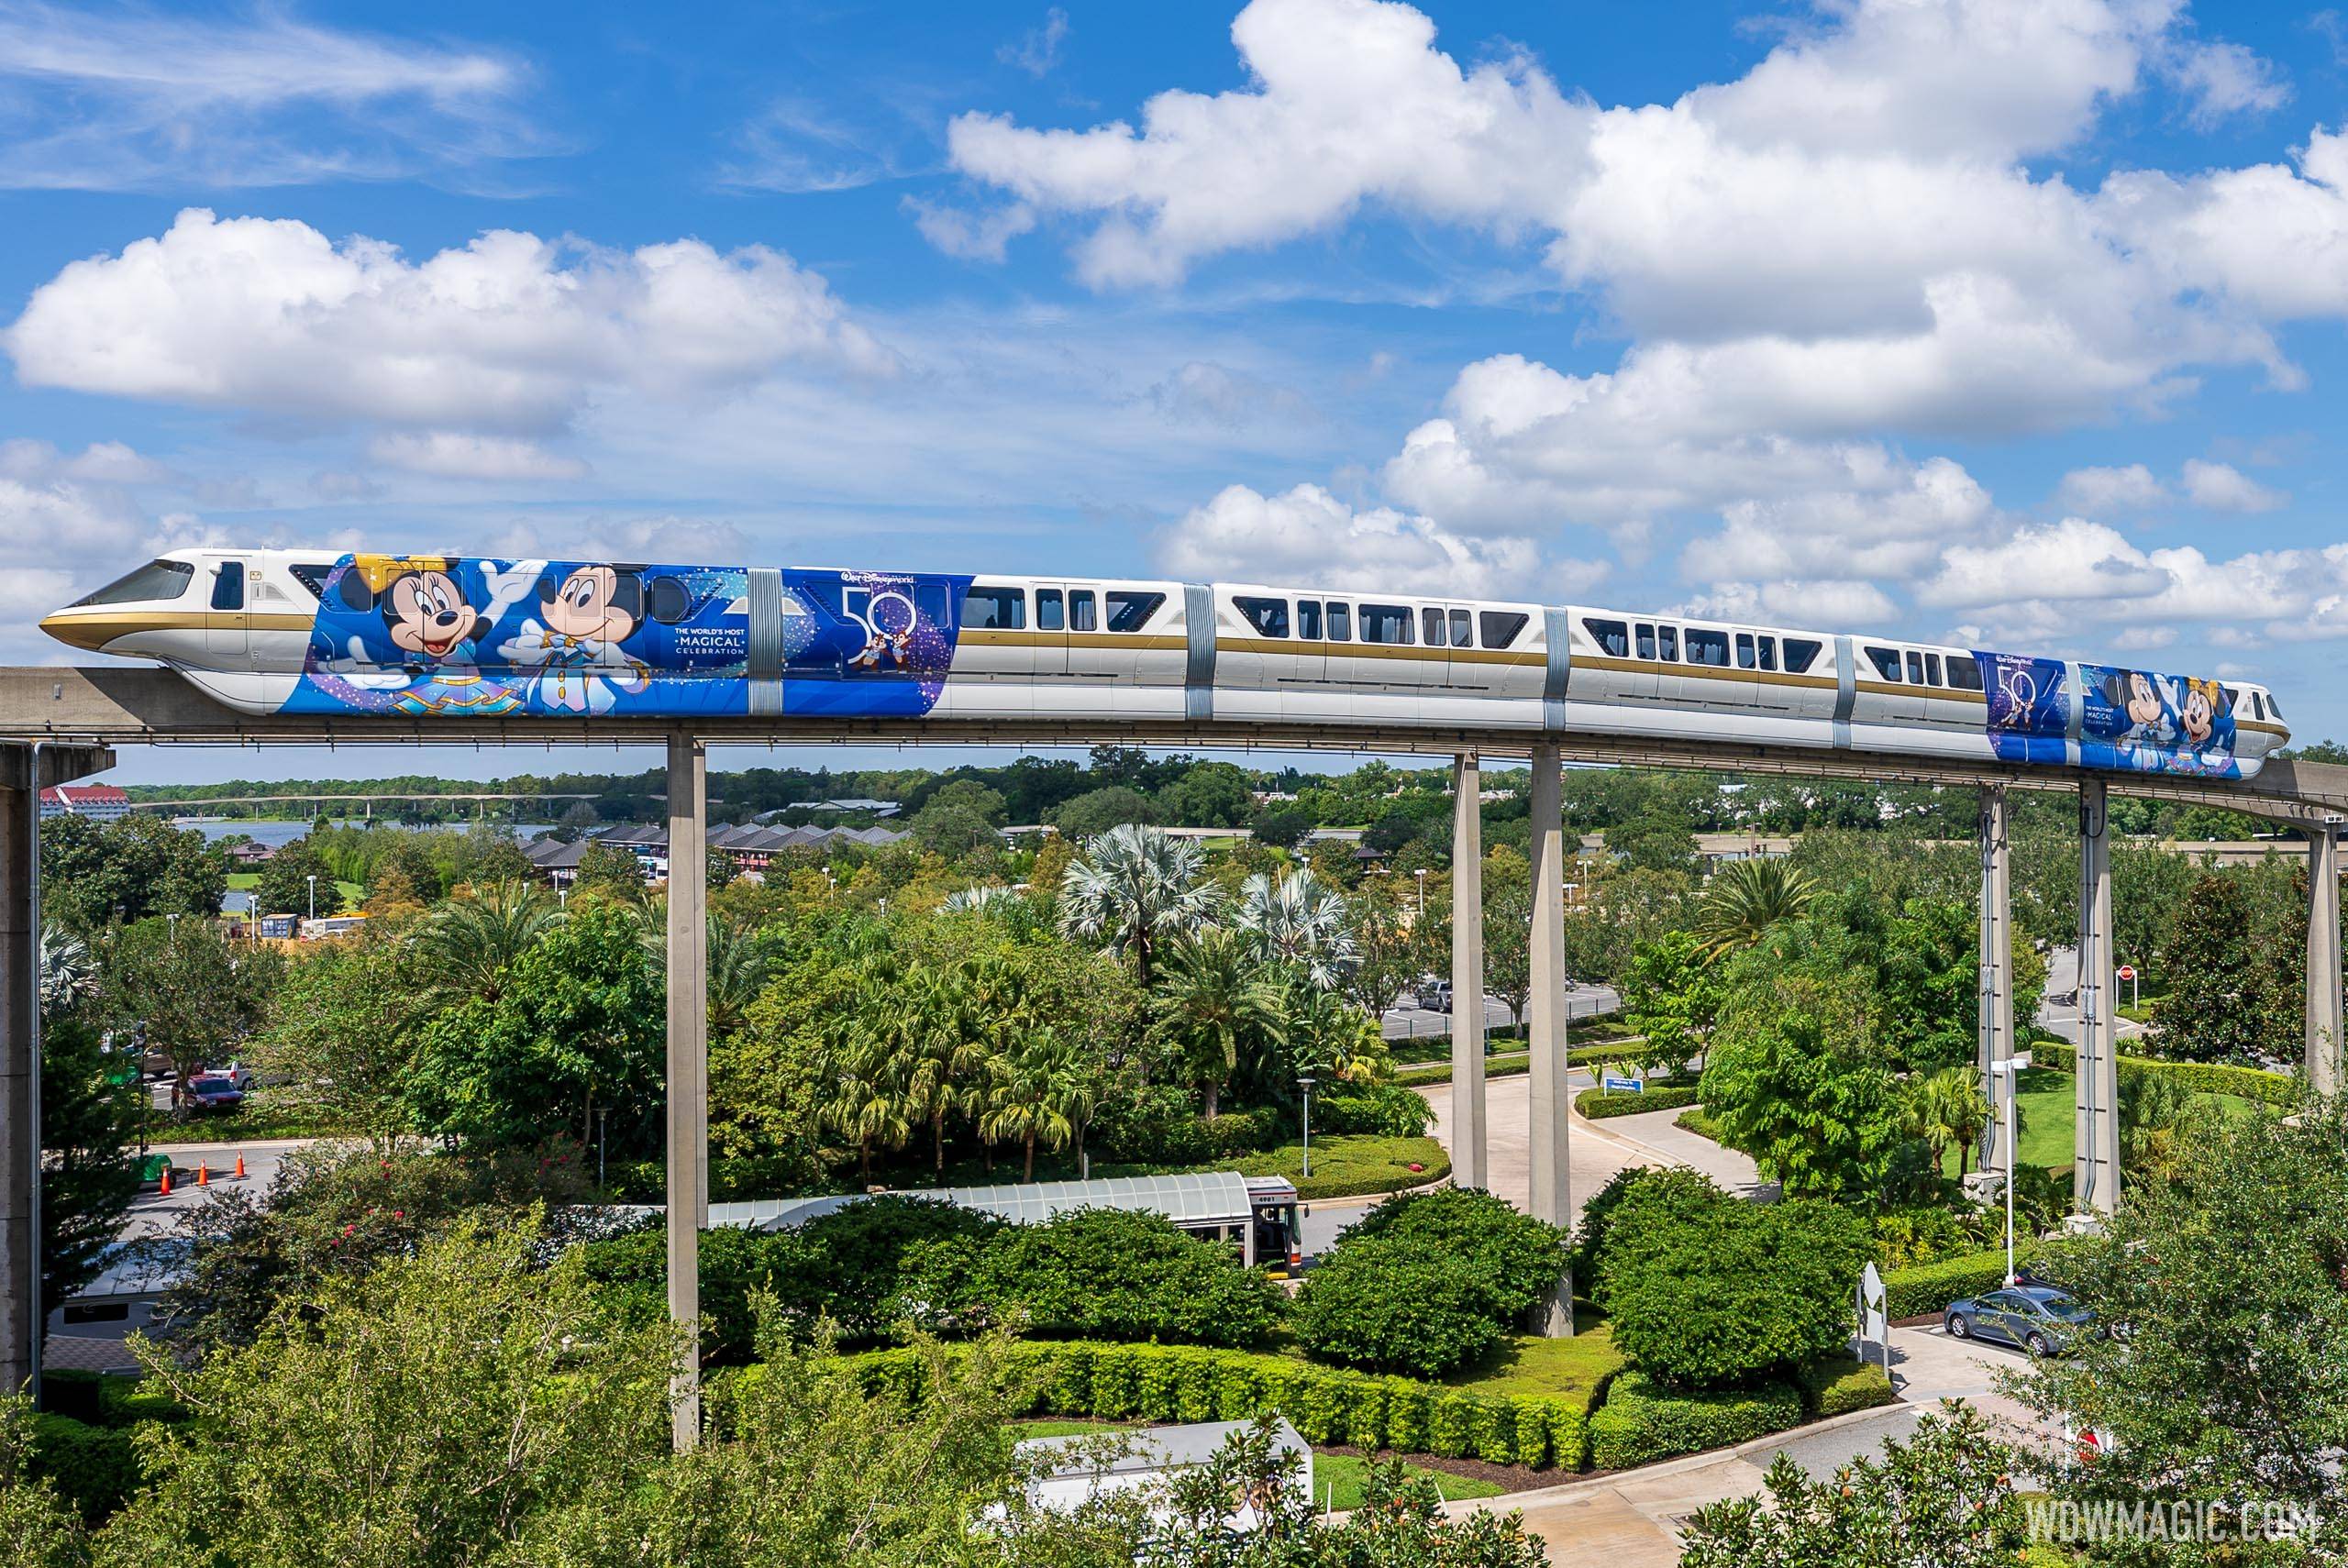 50th-anniversary wrap removed from Monorail Gold at Walt Disney World